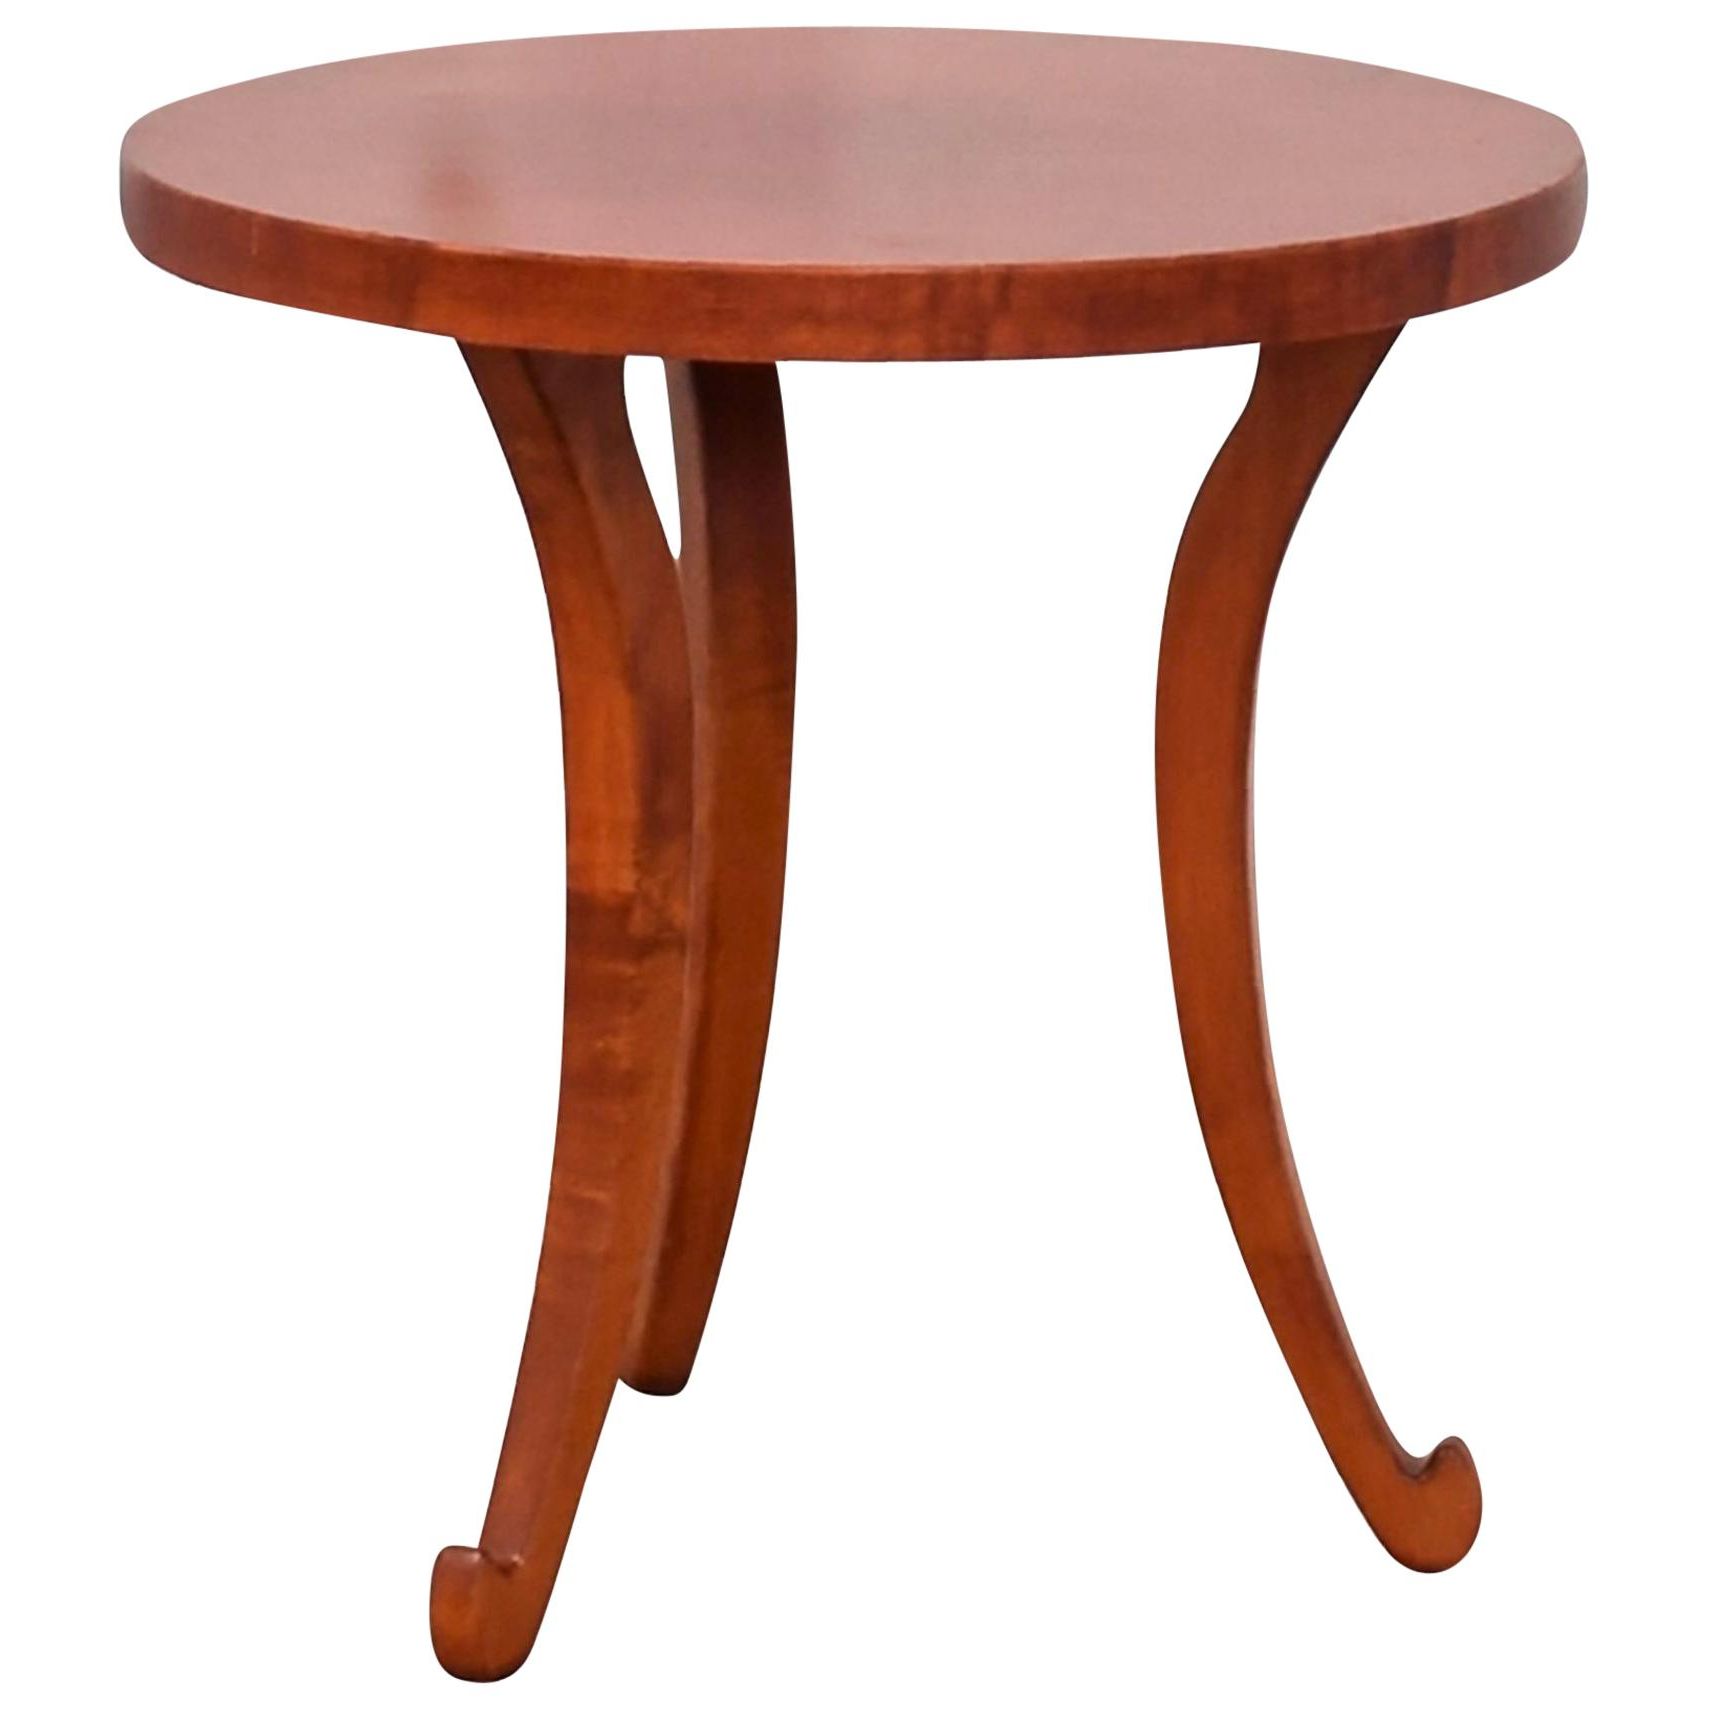 Warner Round Pedestal Dining Tables In Well Known Vladimir Kagan Nesting Mahogany And Ceramic Tile Top Tables (View 20 of 25)